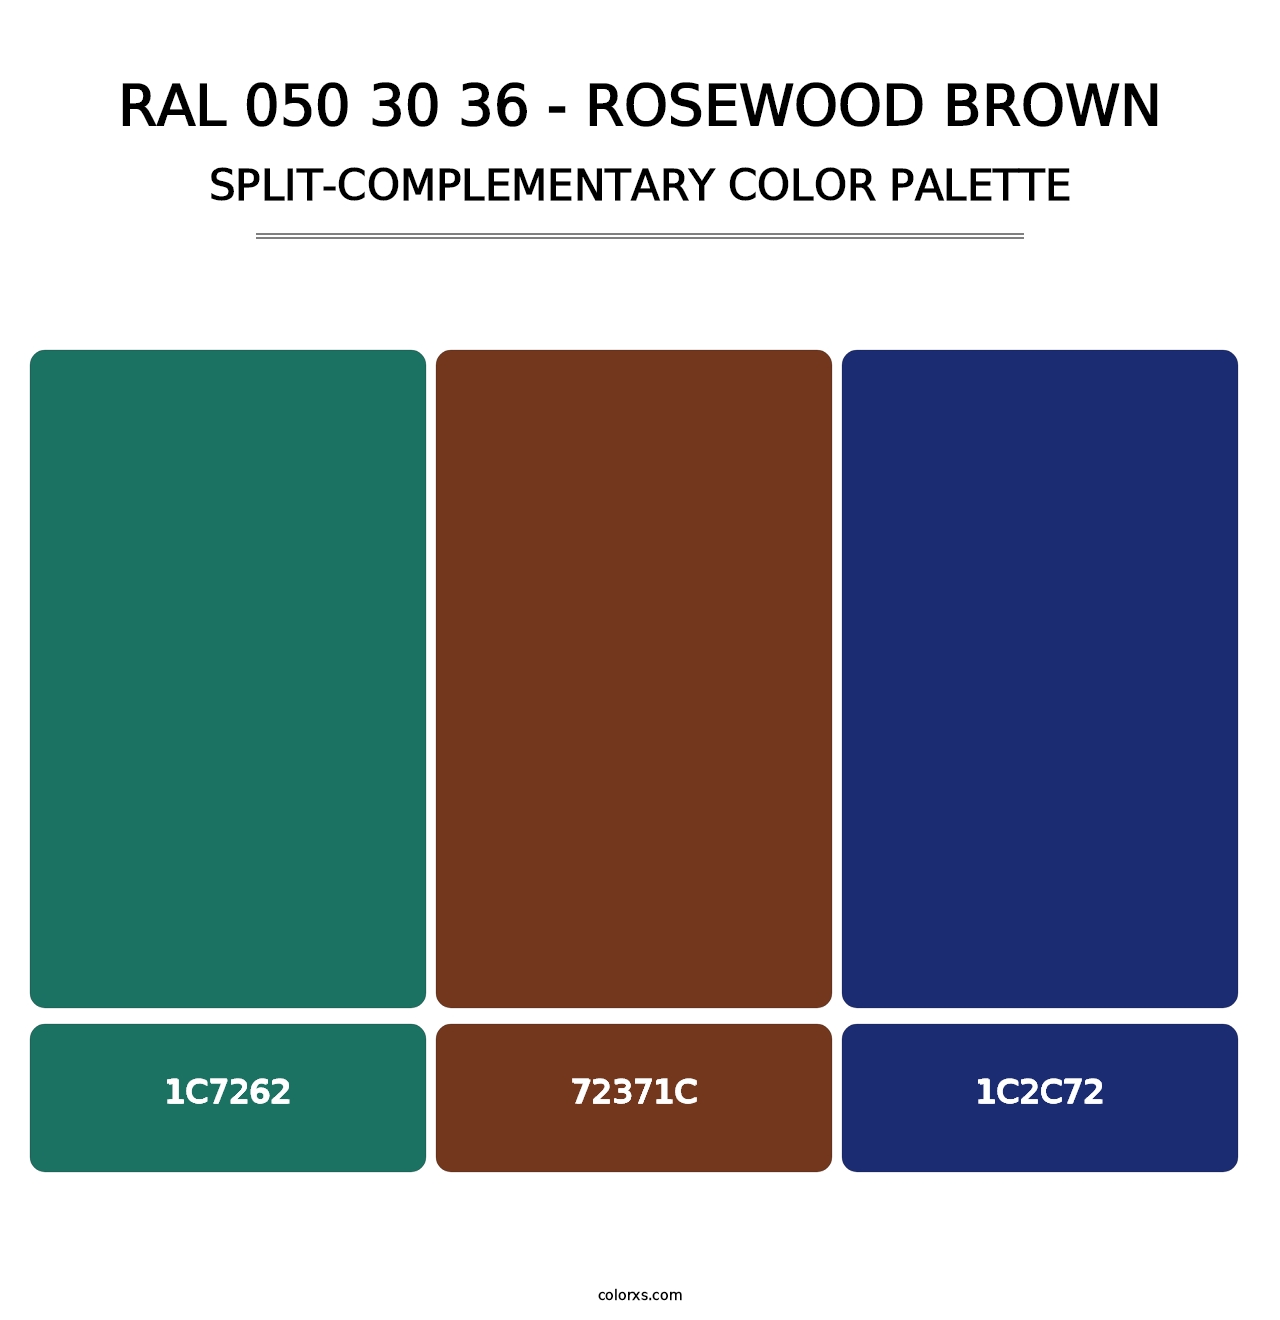 RAL 050 30 36 - Rosewood Brown - Split-Complementary Color Palette